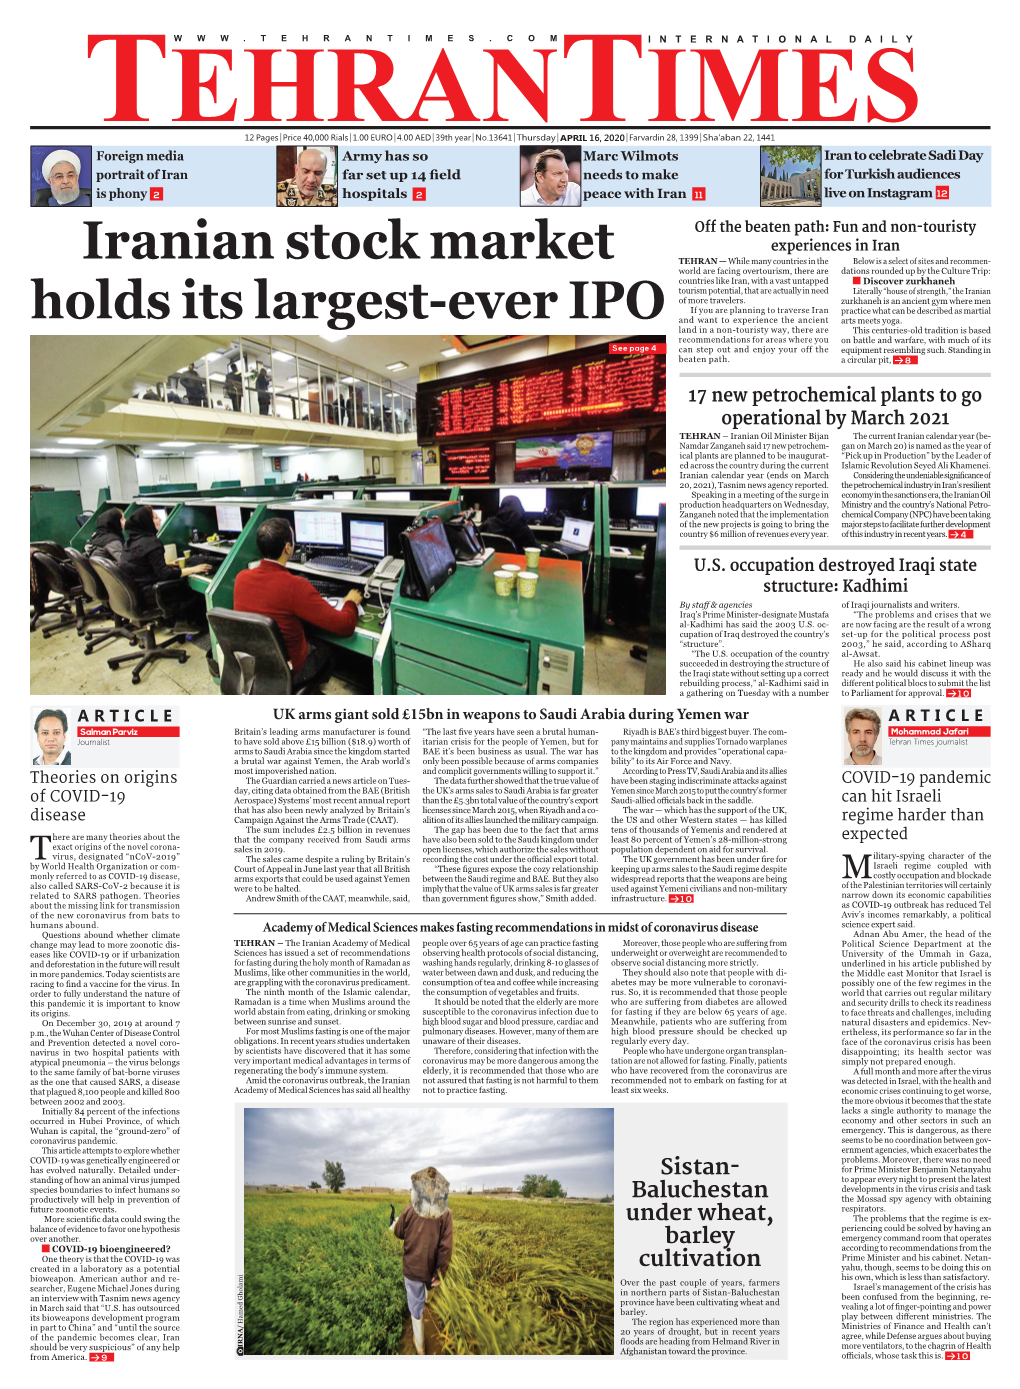 Iranian Stock Market Holds Its Largest-Ever